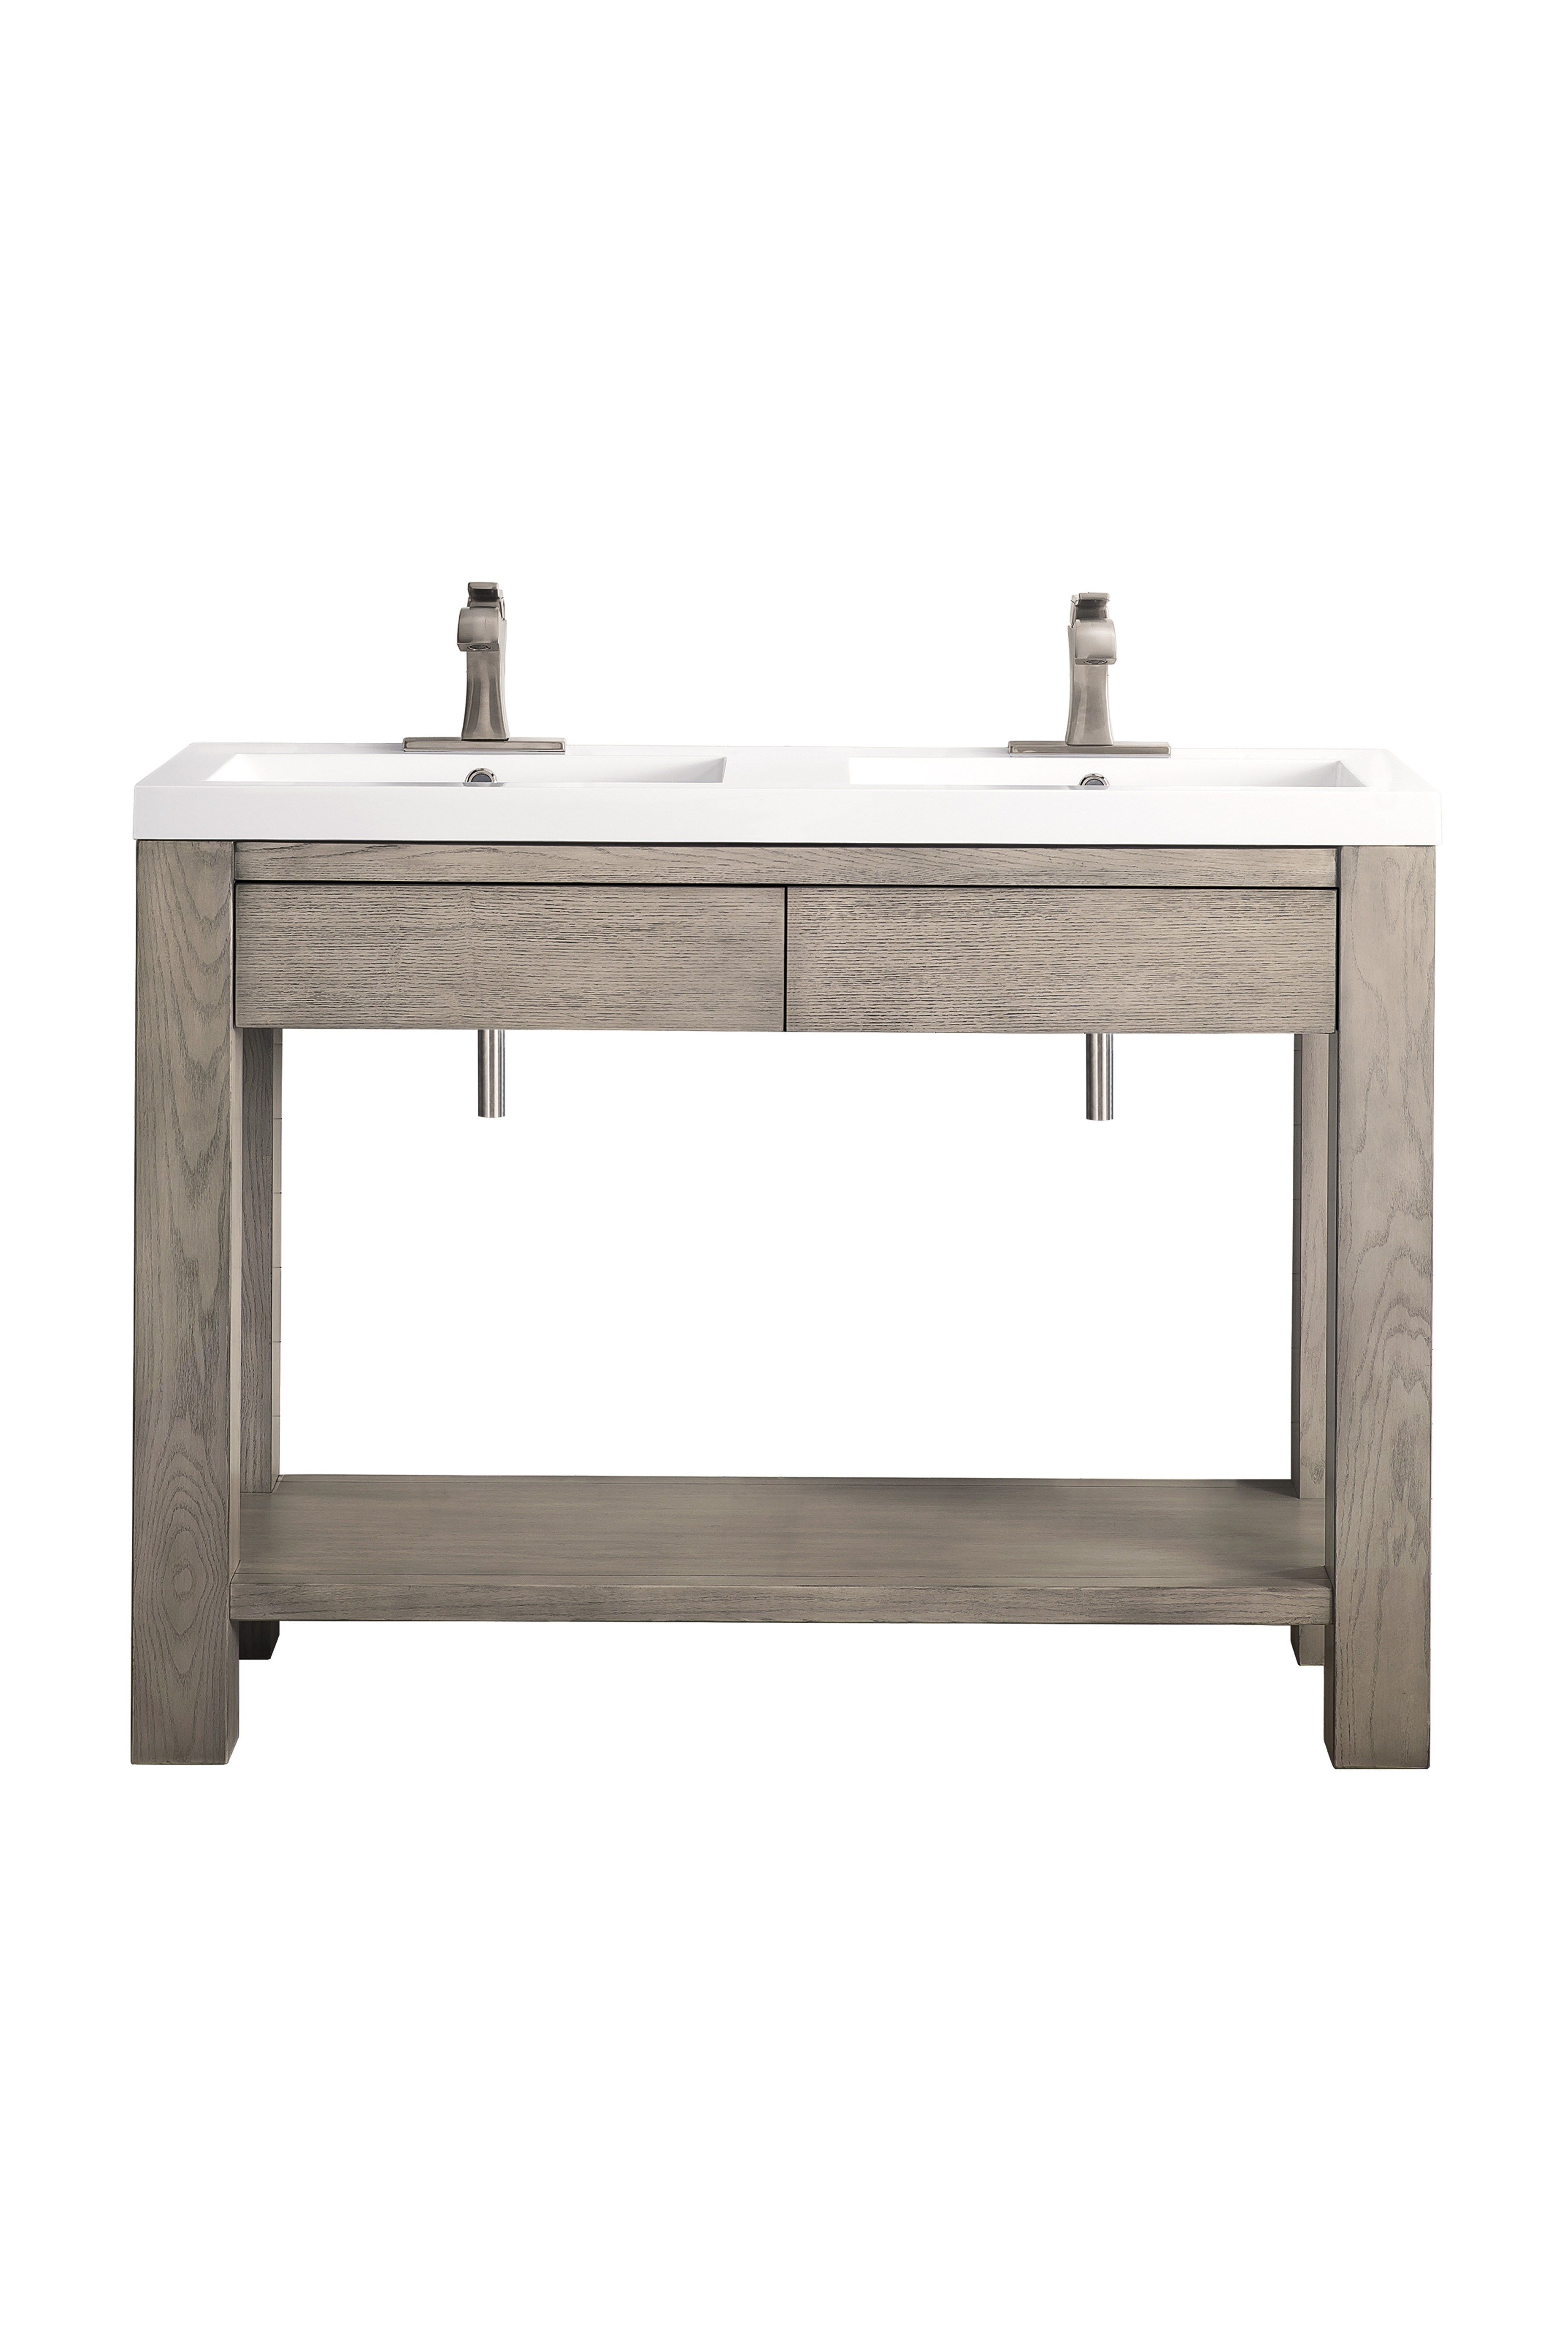 James Martin C205V47PTAWG Brooklyn 47" Wooden Sink Console, Platinum Ash w/ White Glossy Composite Countertop - Click Image to Close